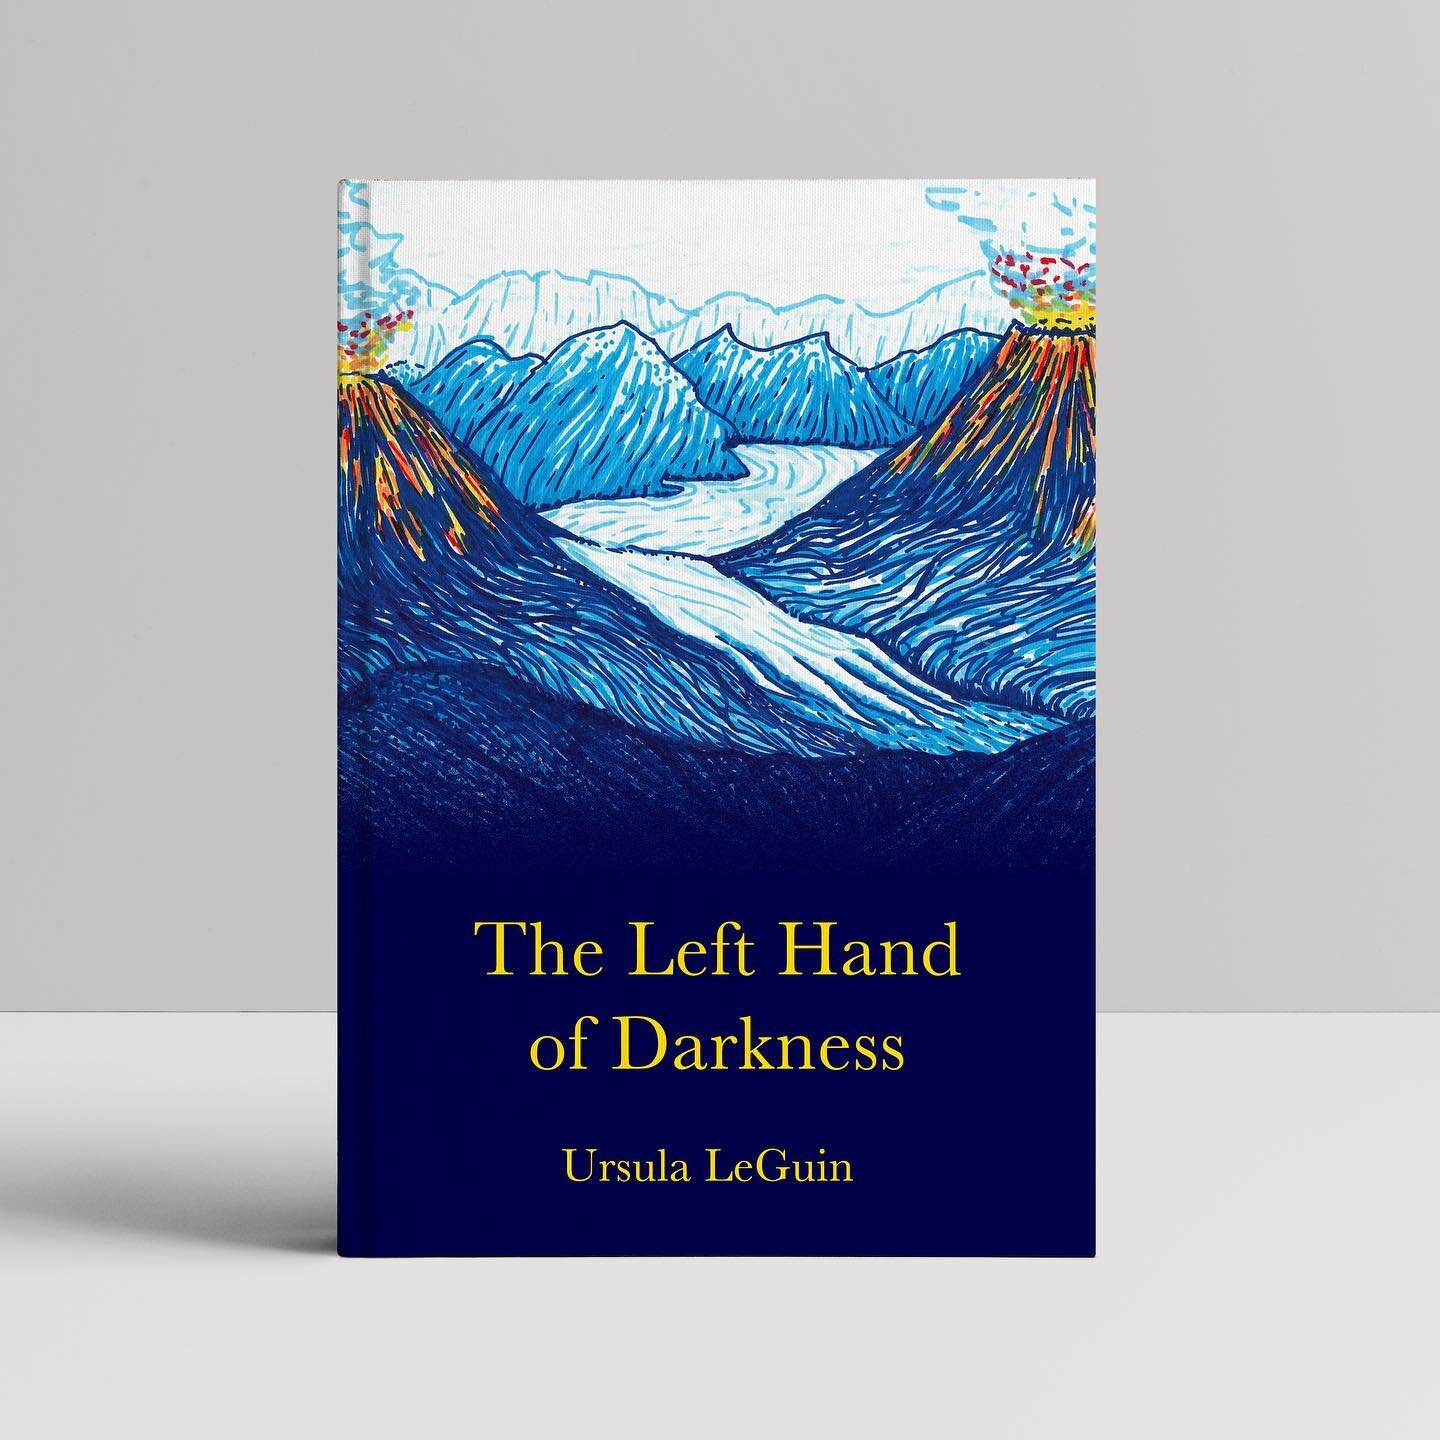 Book Cover Design

The Left Hand of Darkness by Ursula LeGuin

&ldquo;The only thing that makes life possible is permanent, intolerable uncertainty: not knowing what comes next.&rdquo;

&hellip;

#sciencefictionbooks #surfacedesigncommunity #surfacep